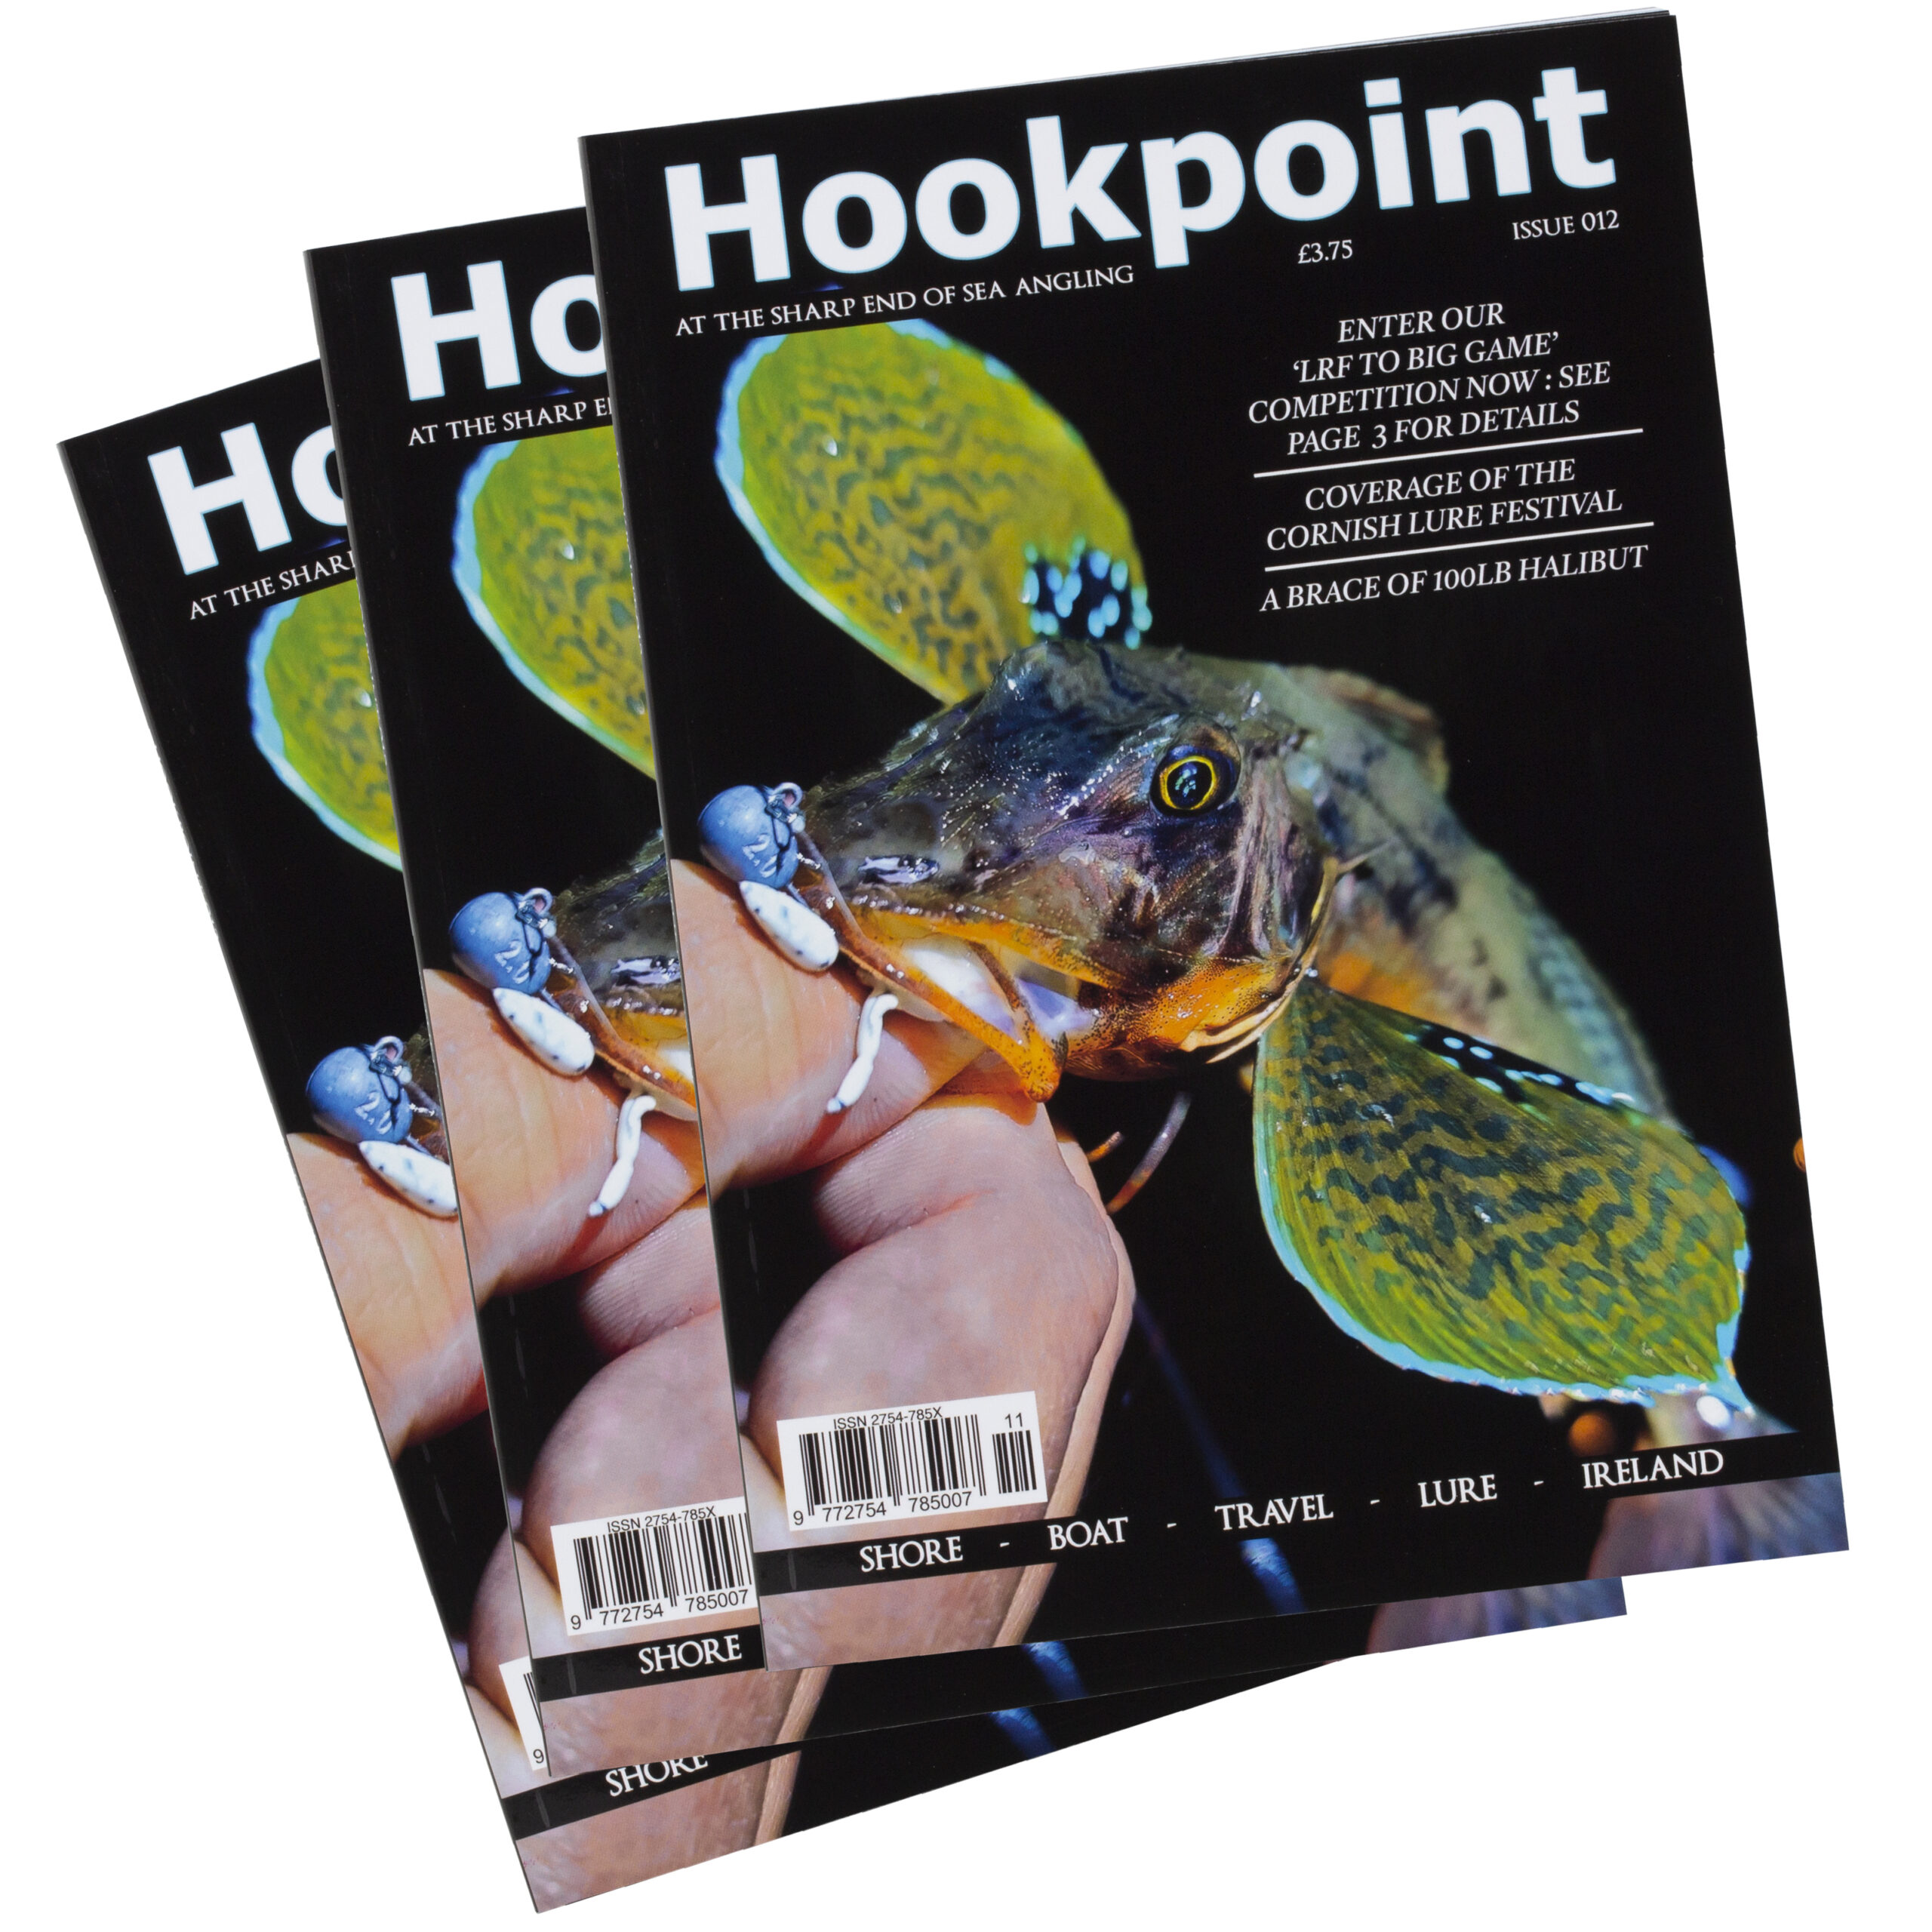 https://www.veals.co.uk/wp-content/uploads/2022/07/hookpoint-issue-12-1-scaled.jpg